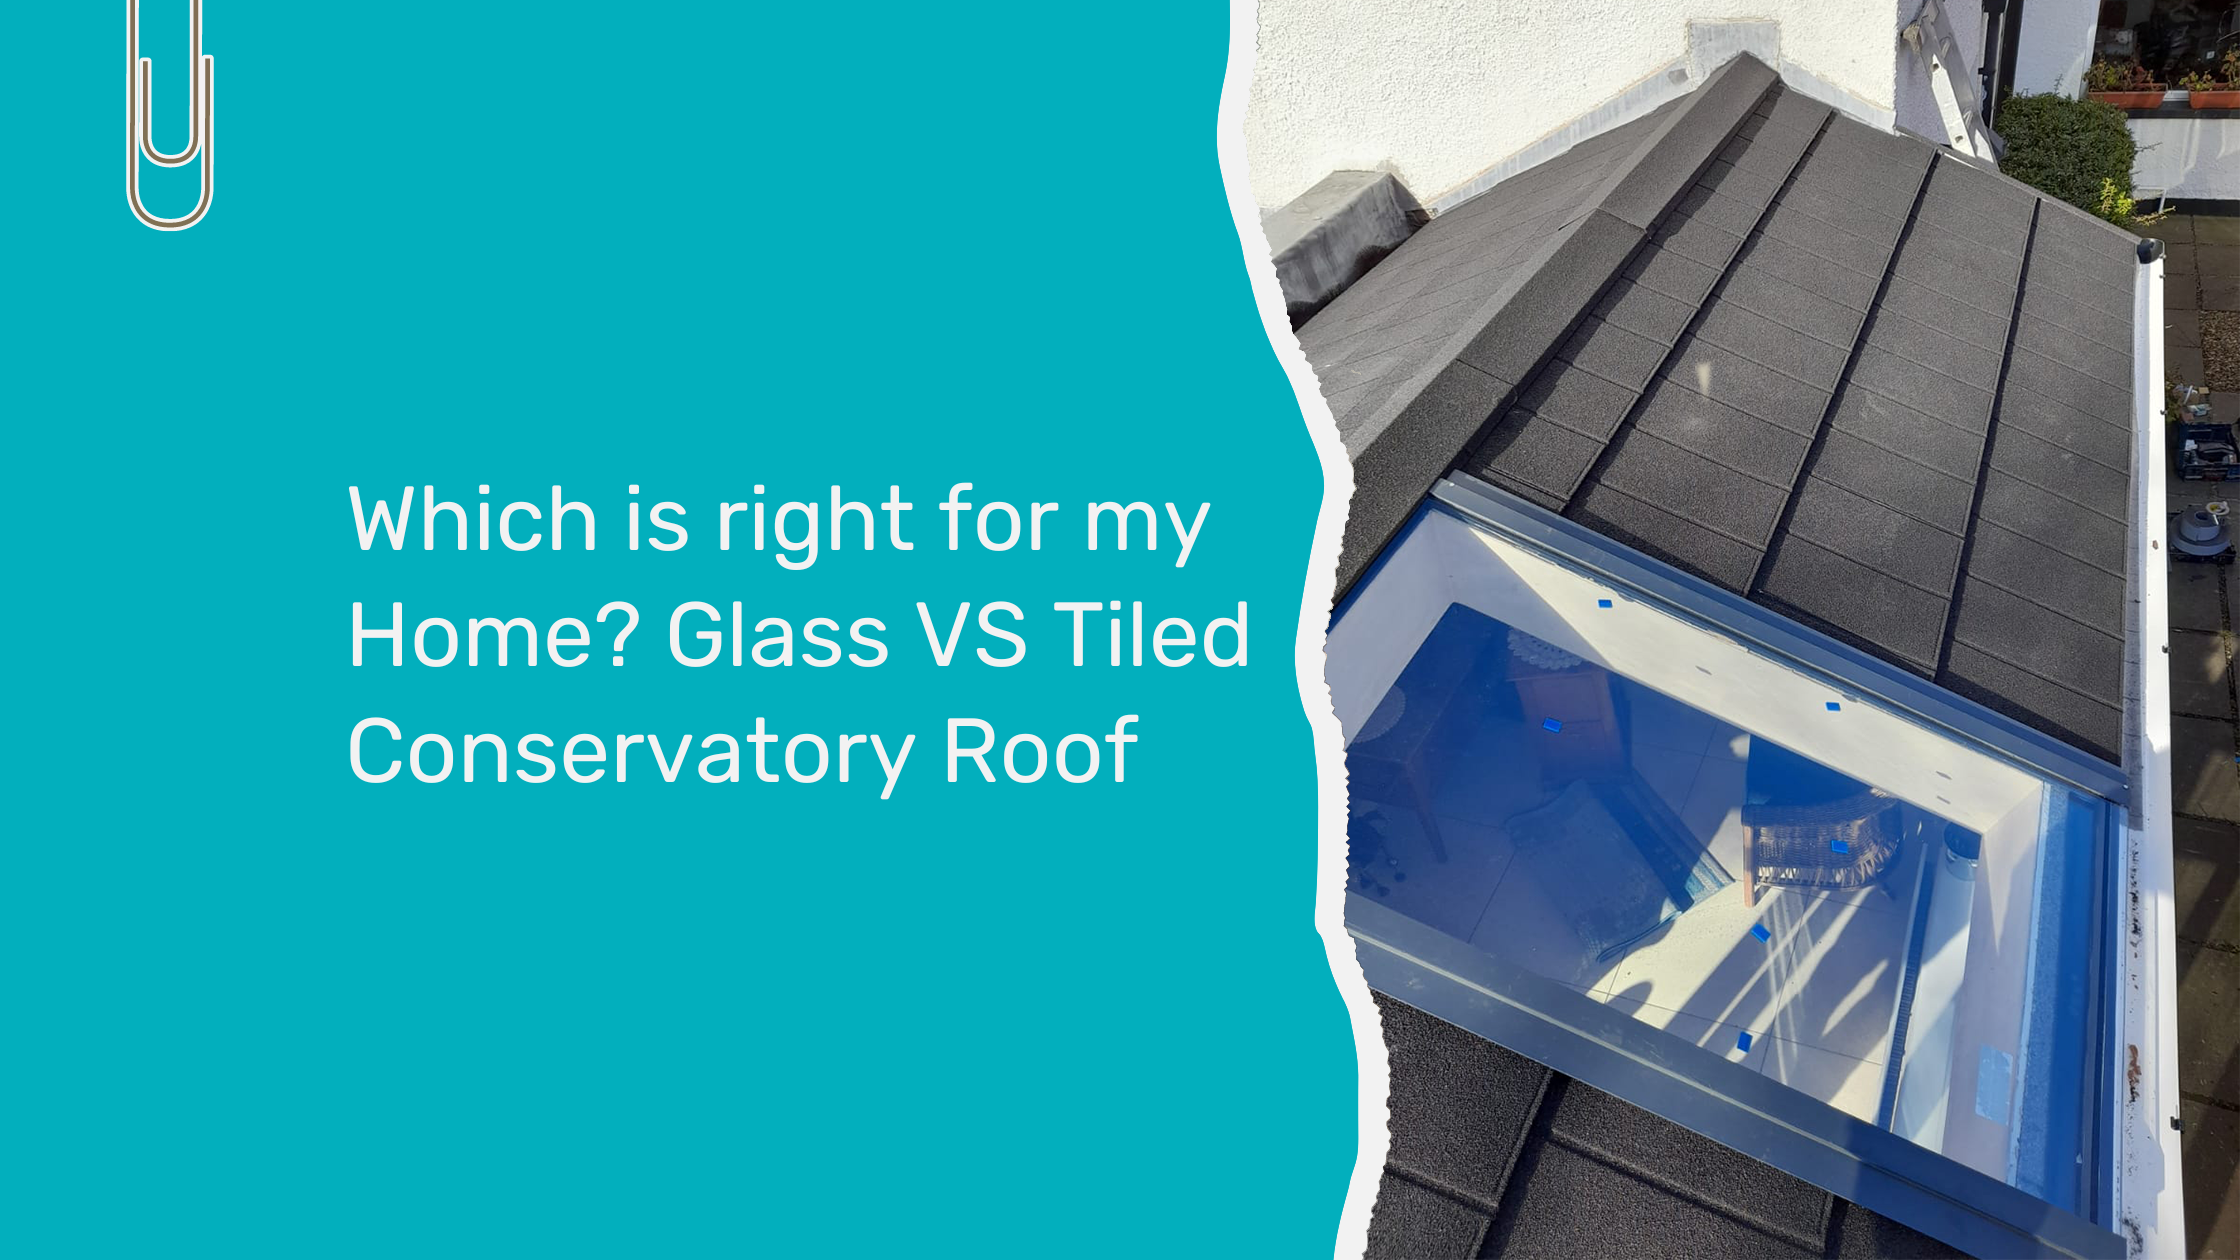 Should I upgrade my conservatory roof to glass or tiled?